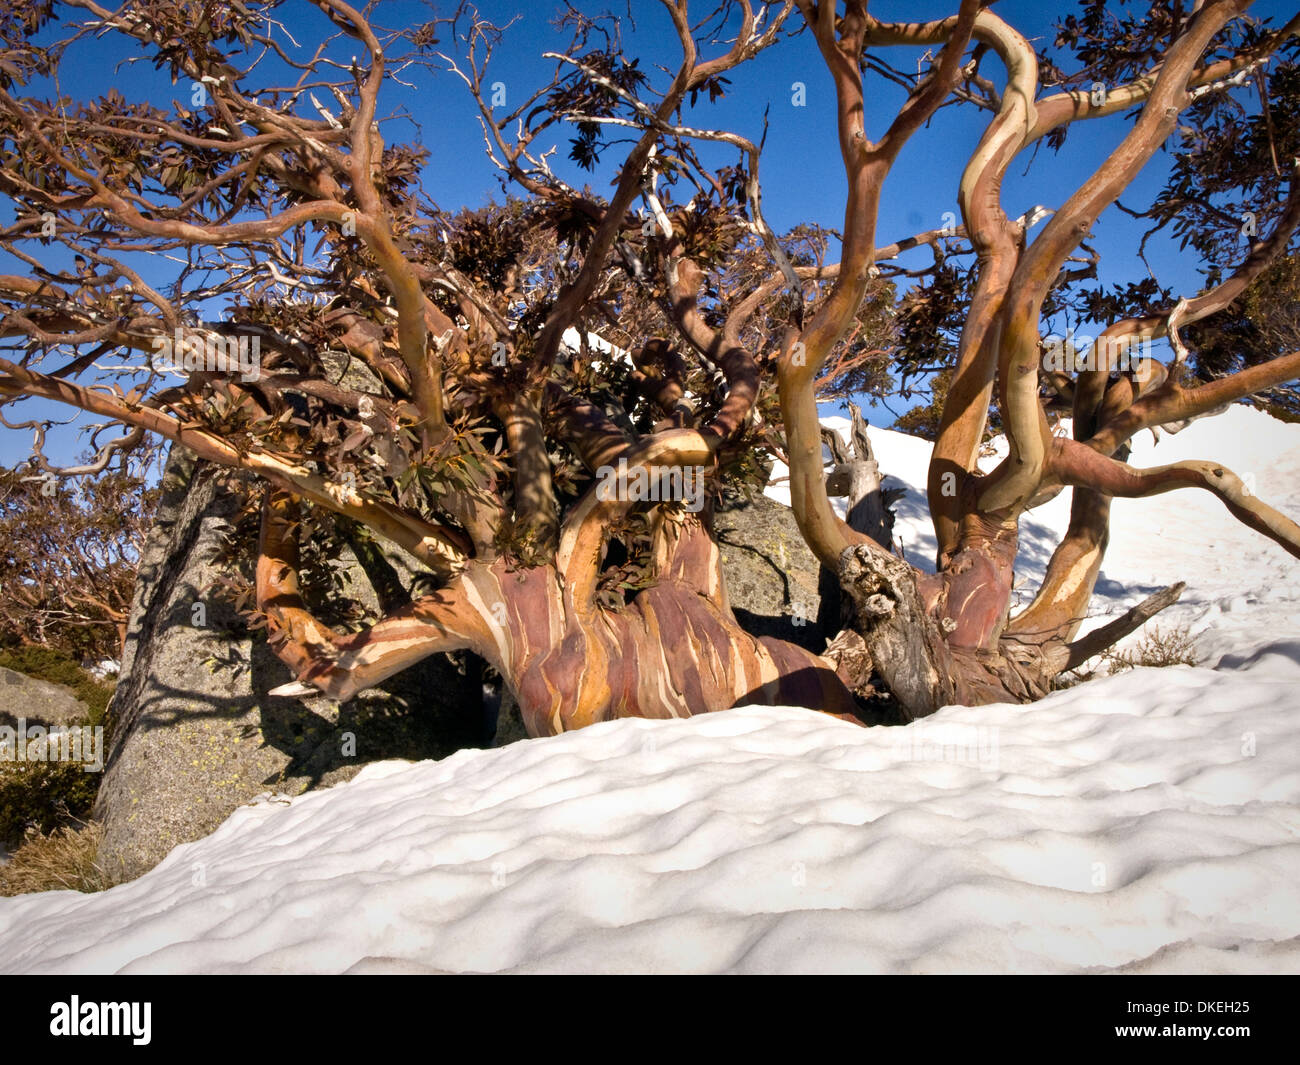 Snow Gum High Resolution Stock Photography and Images - Alamy